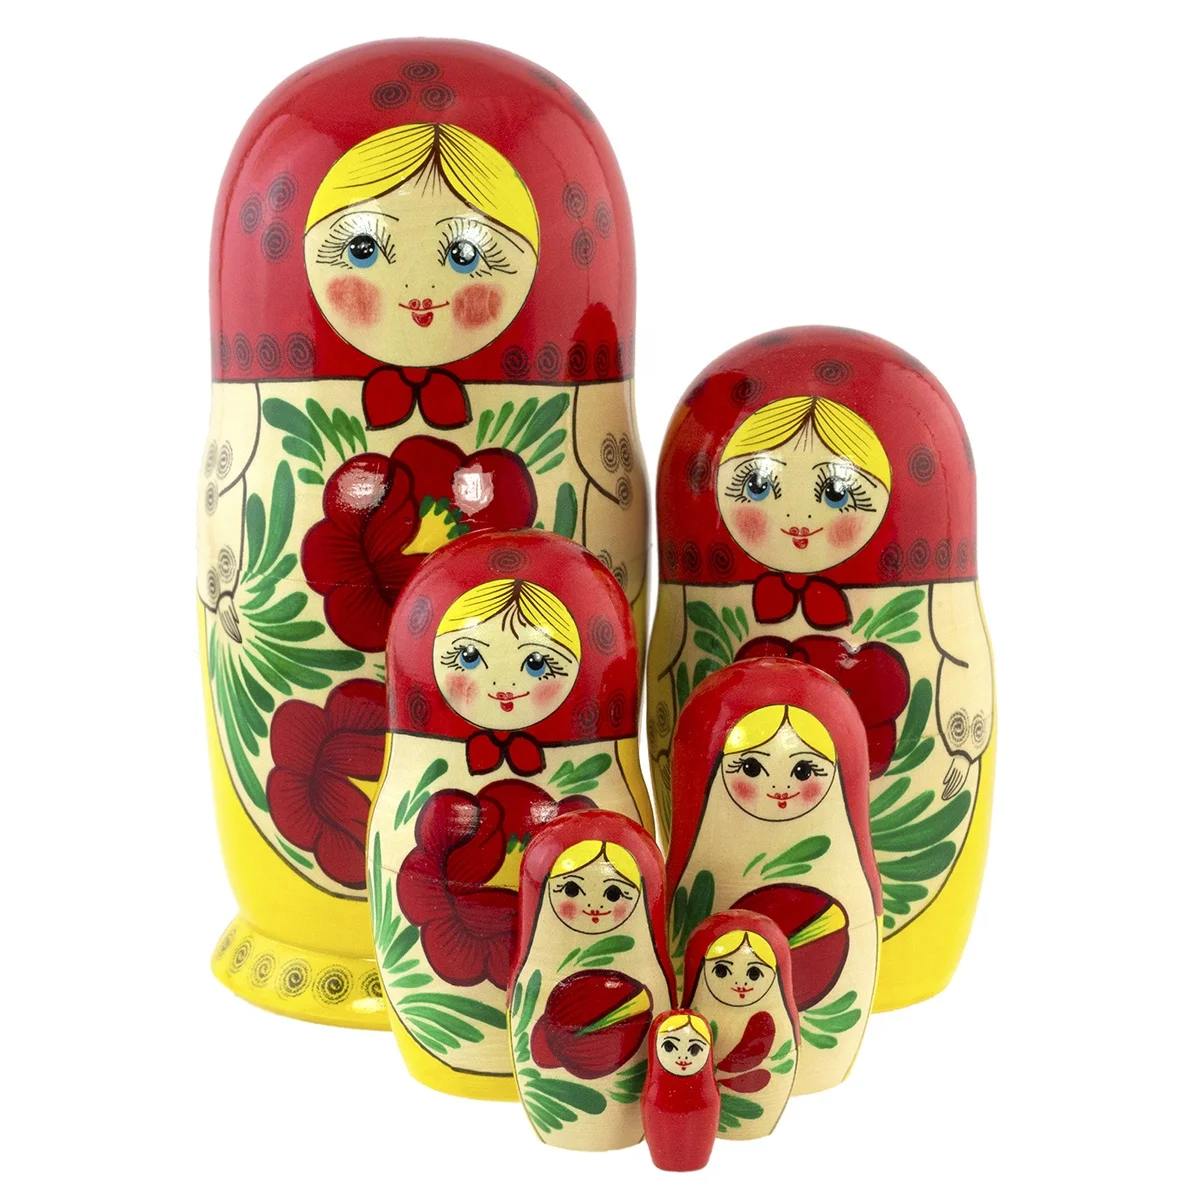 Azhna 7 pcs 19 cm Souvenir Matryoshka Home Decor Collection Classic Style Nesting Doll Hand Painted Russian Doll Wooden Stacking Doll Burgundy